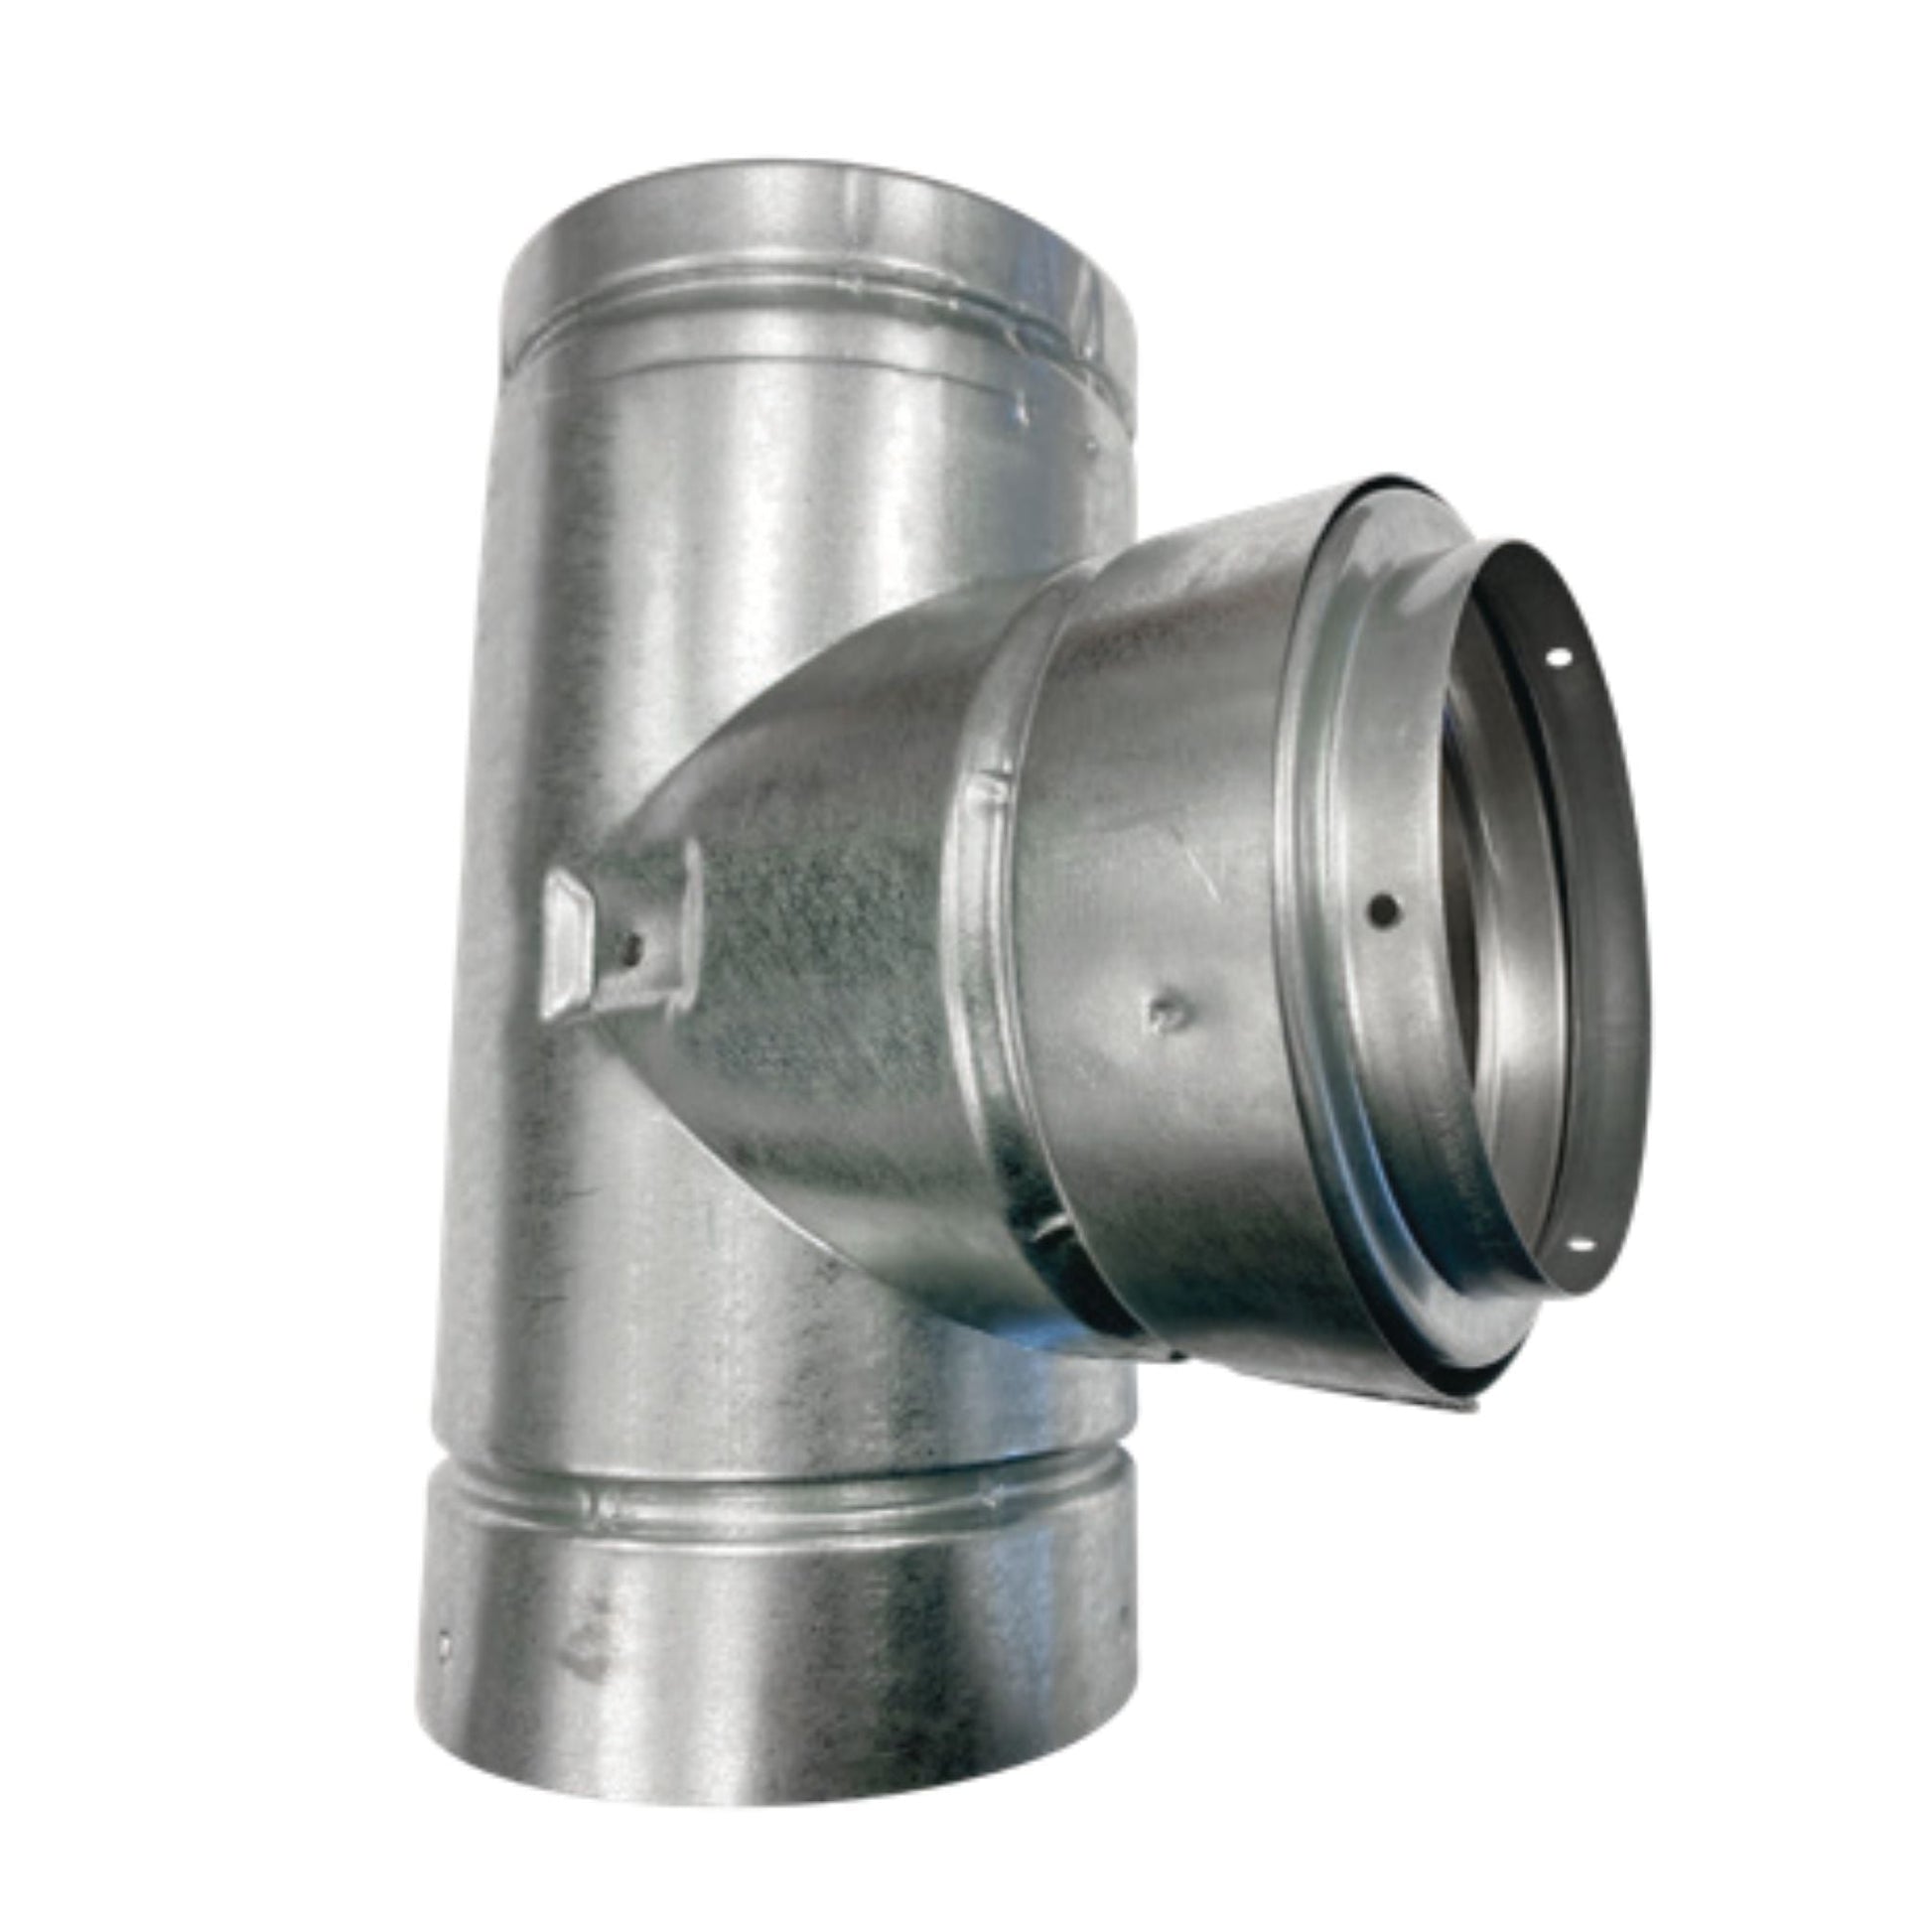 DuraVent Round Type B Gas Vent Model BV 4"-8" Reduction Tee